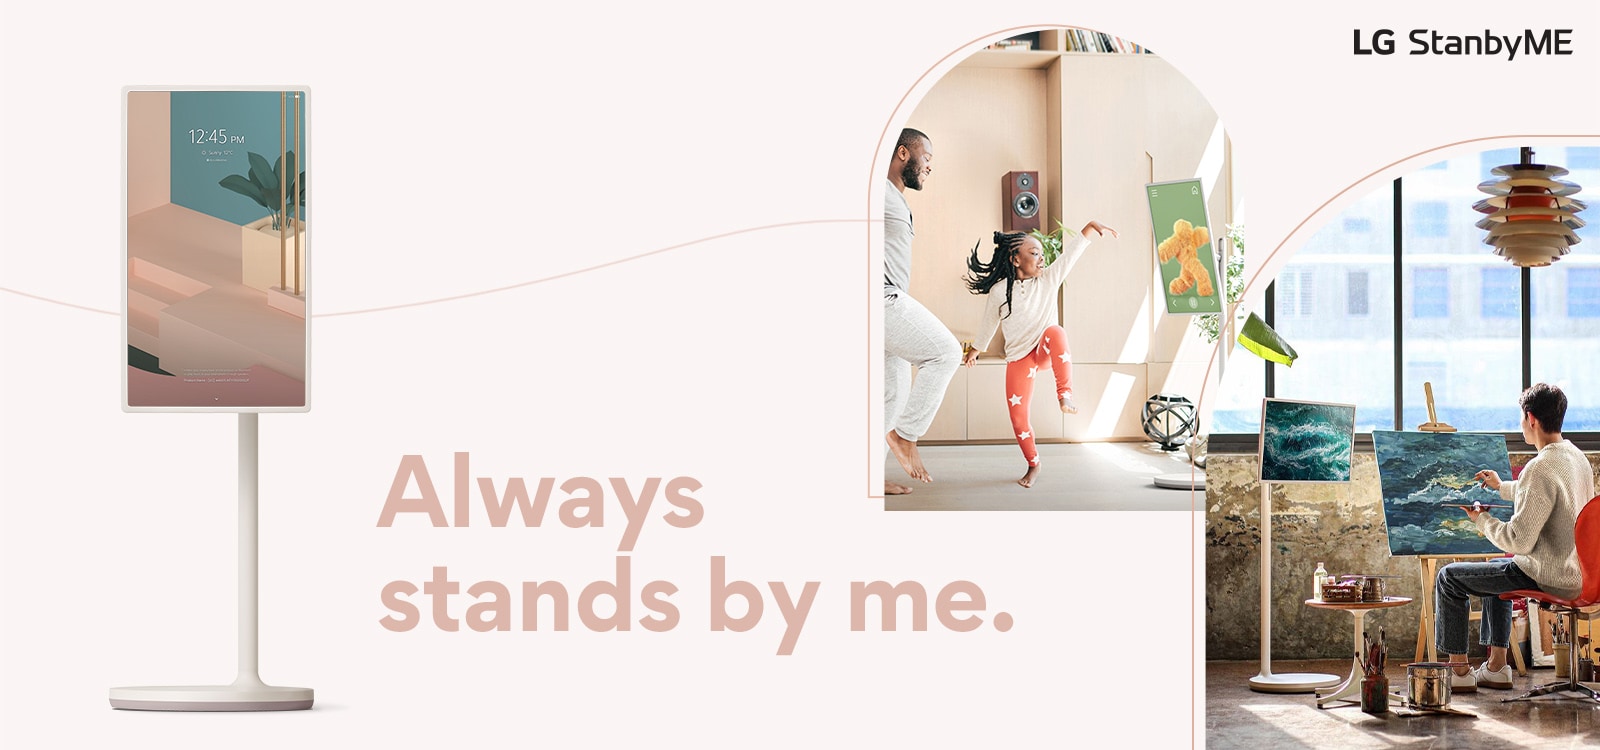 screen stands near copy – “Always stands by me.” Copy is written in dark pink color. There are two lifestyle interior images cropped in curved lines – each showing TV placed in study room and living room. LG StanbyME logo is placed on right top corner on desktop and left top corner on mobile view.